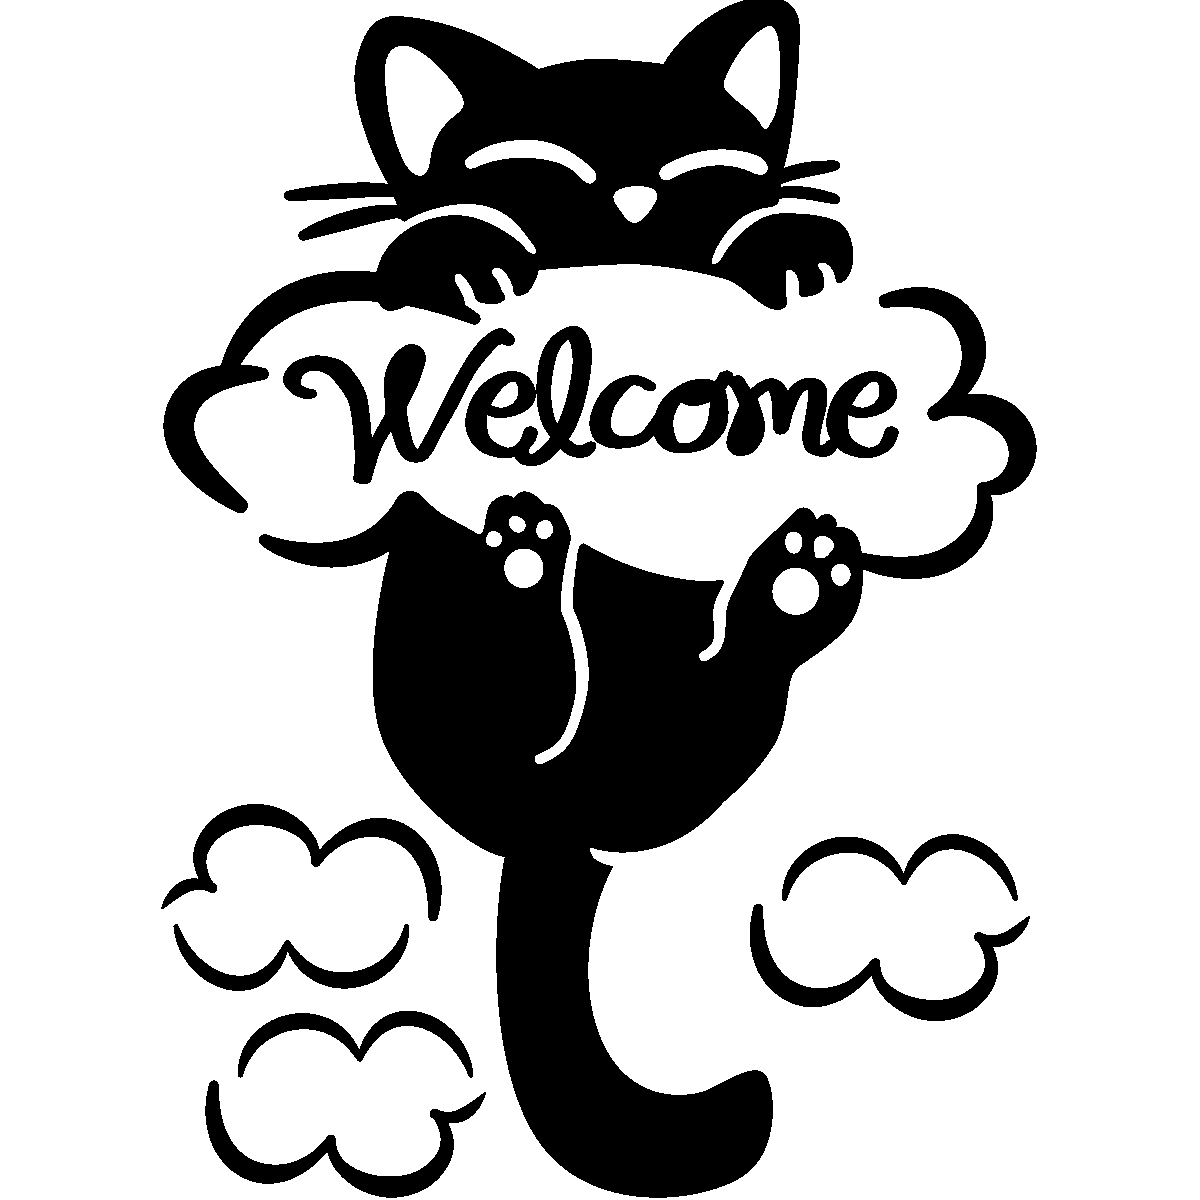 Wall Decal Door Welcome Cat Wall Decals Mini Wall Decal Animals Ambiance Sticker